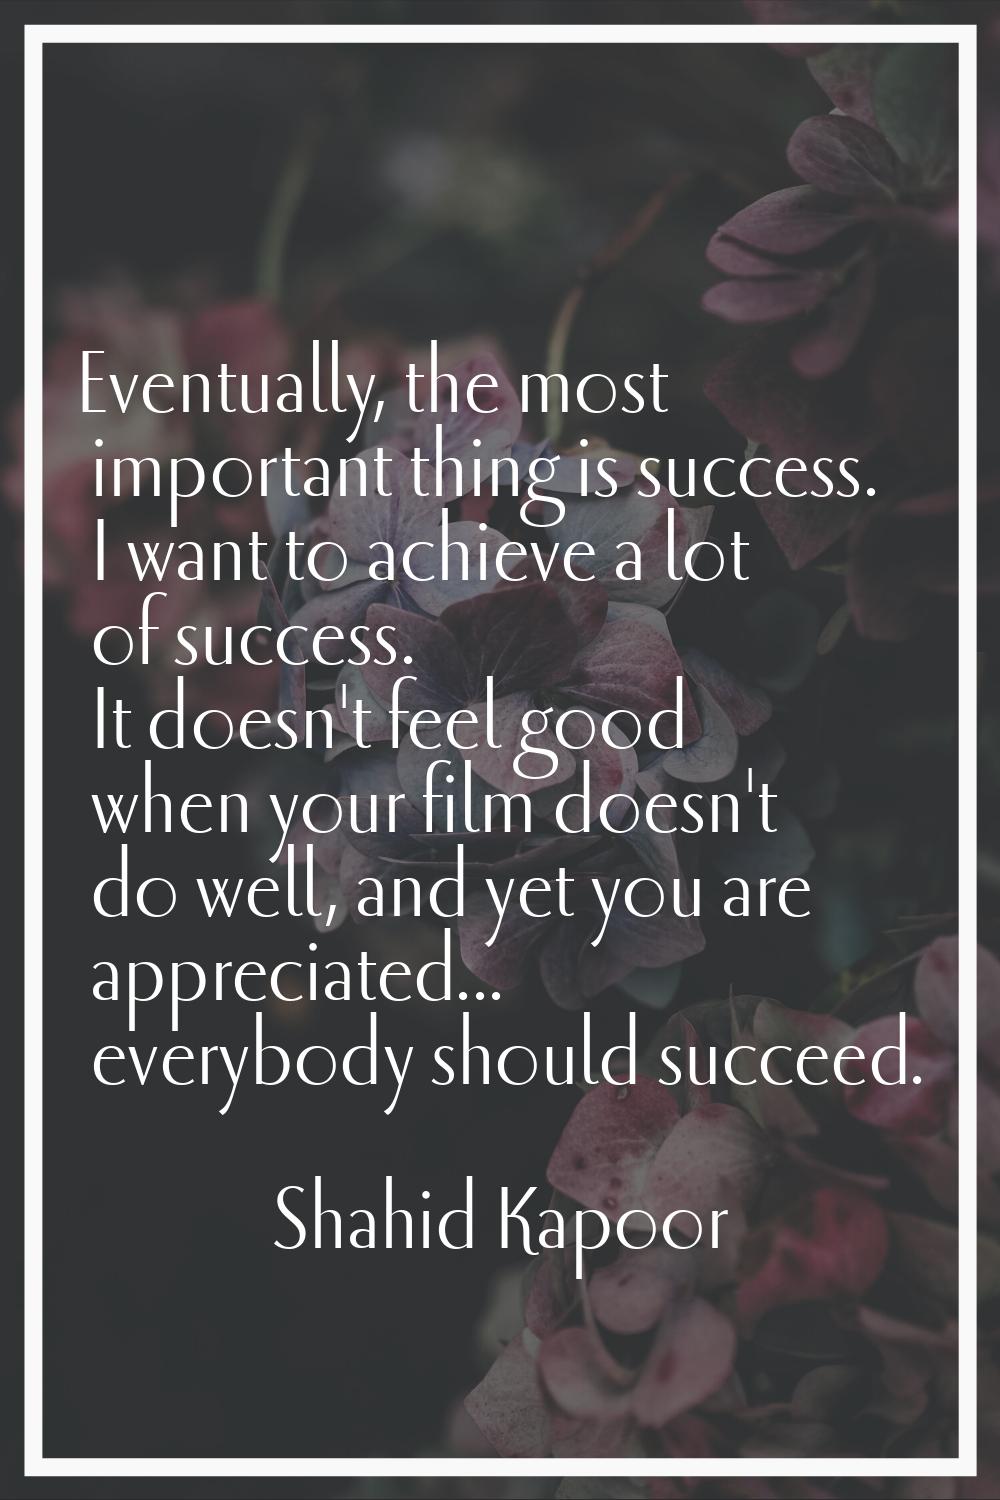 Eventually, the most important thing is success. I want to achieve a lot of success. It doesn't fee